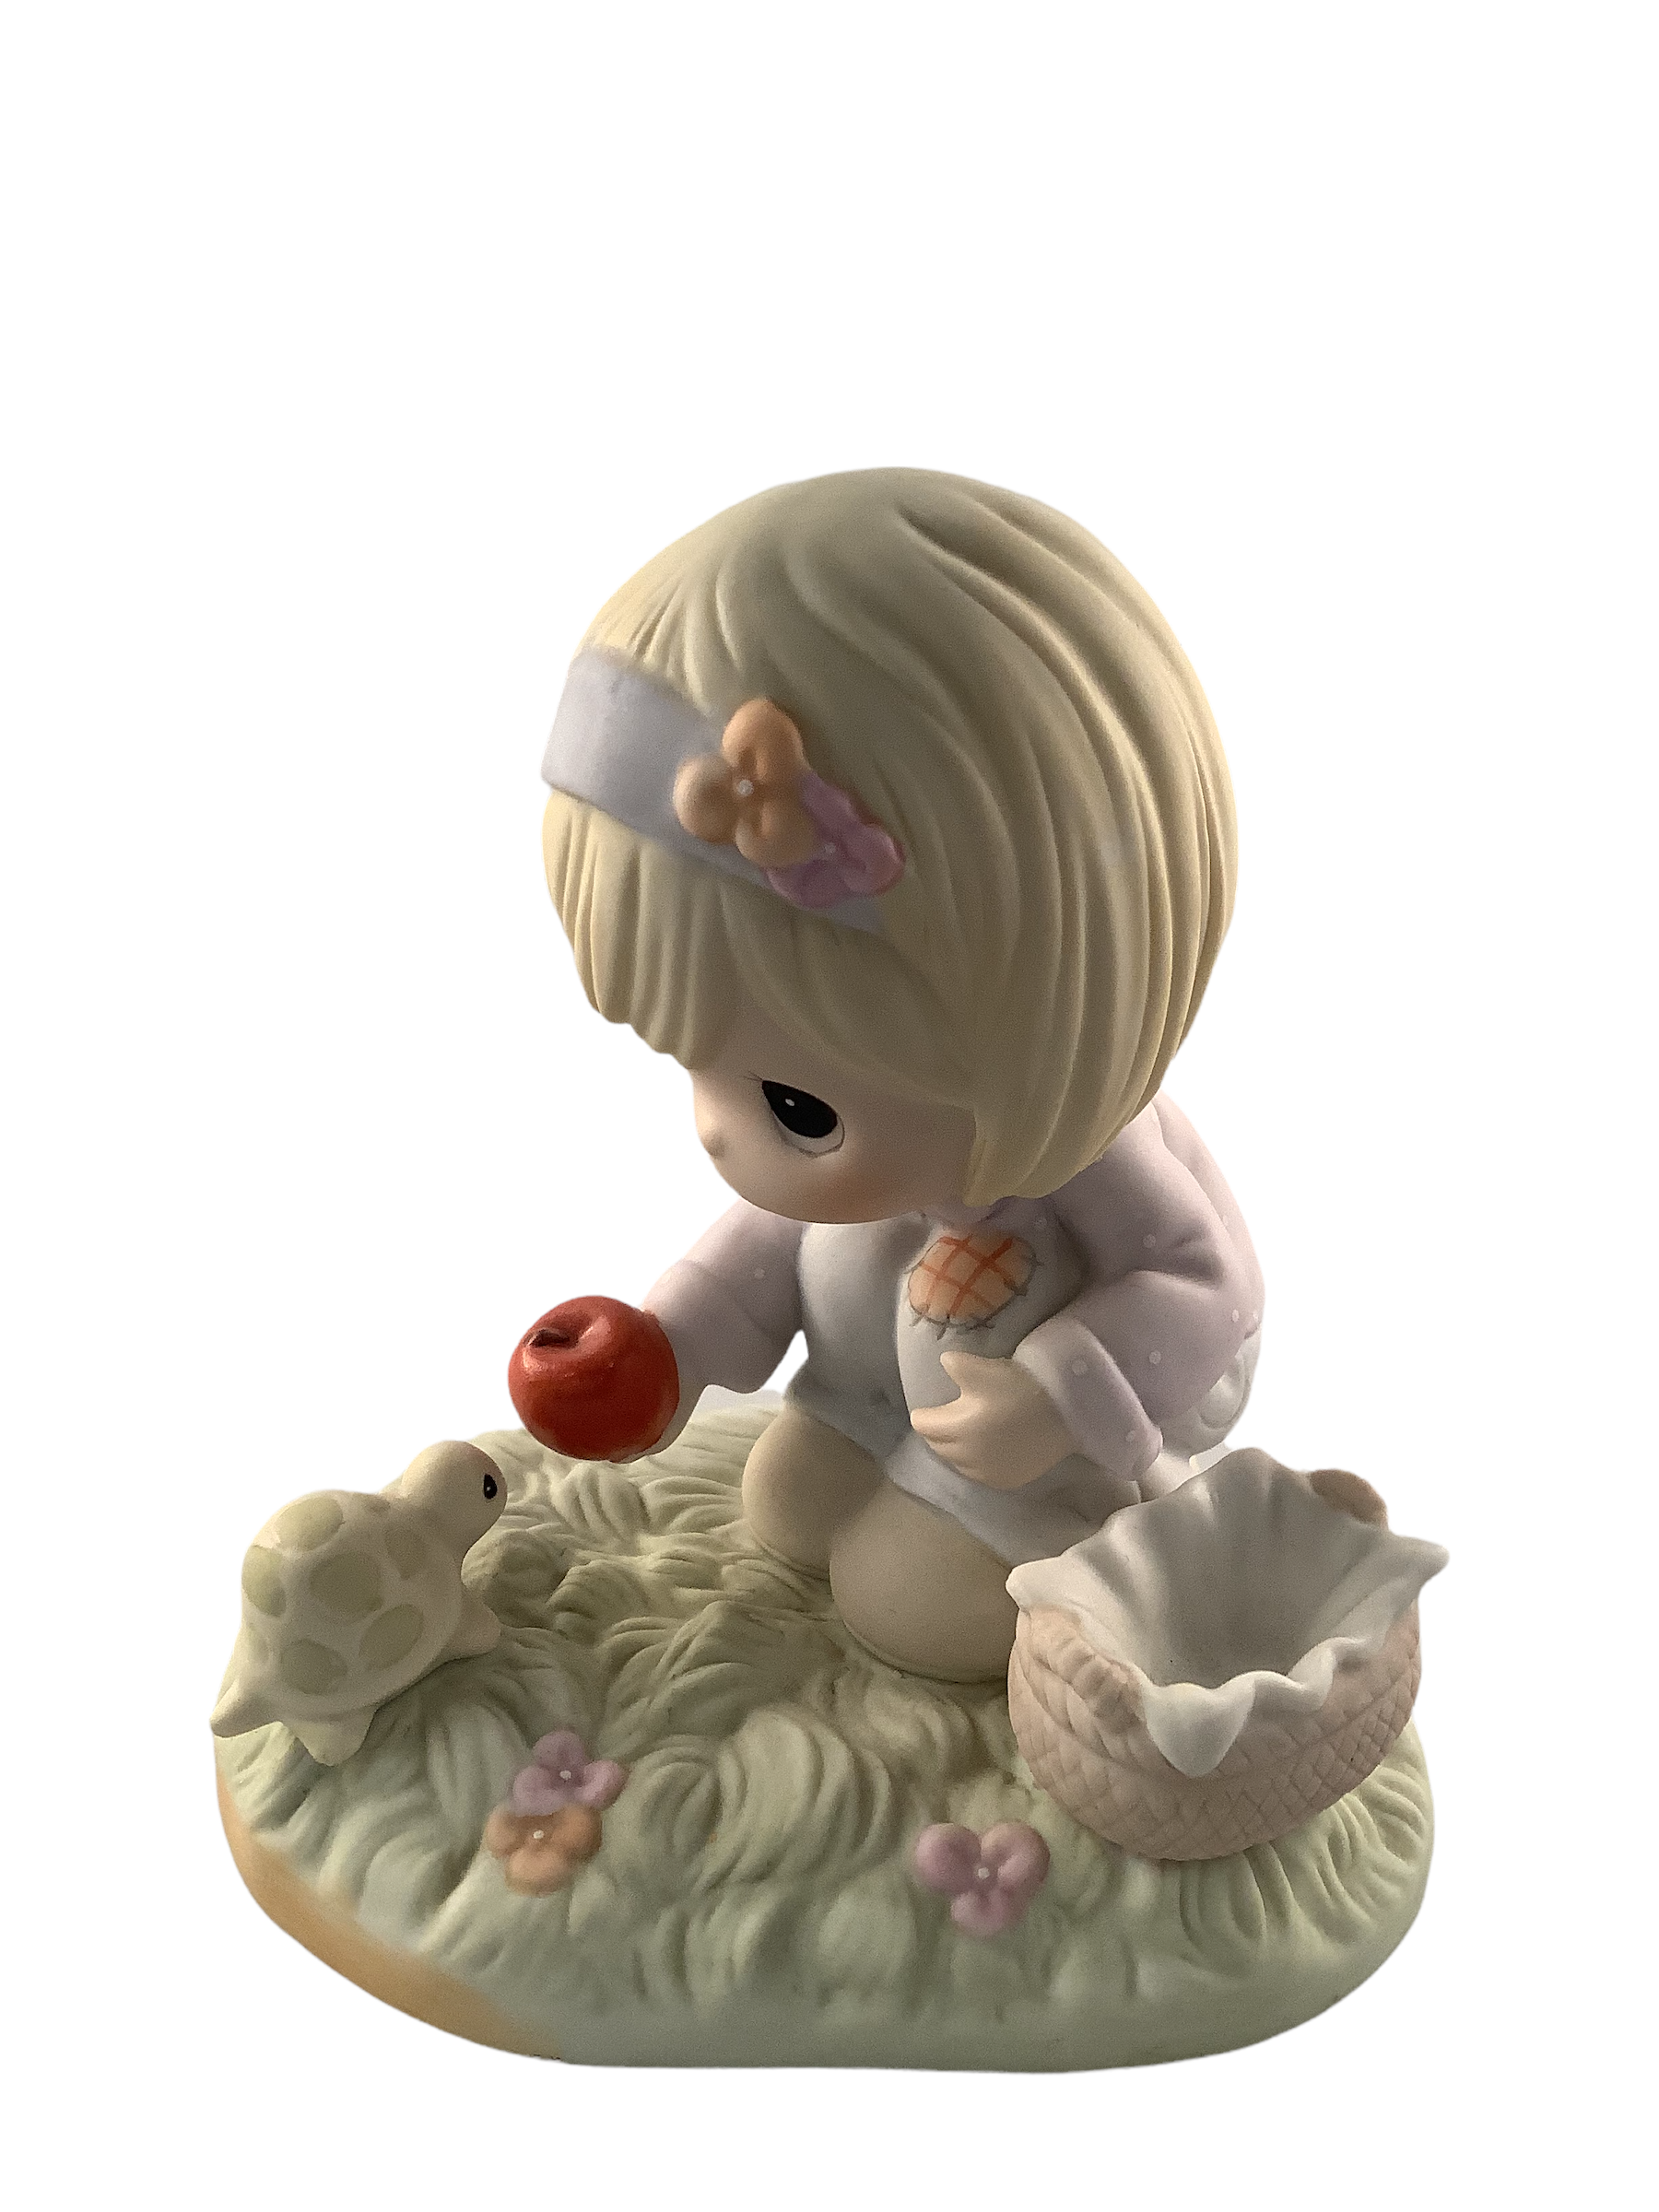 My Last One For You - Precious Moment Figurine